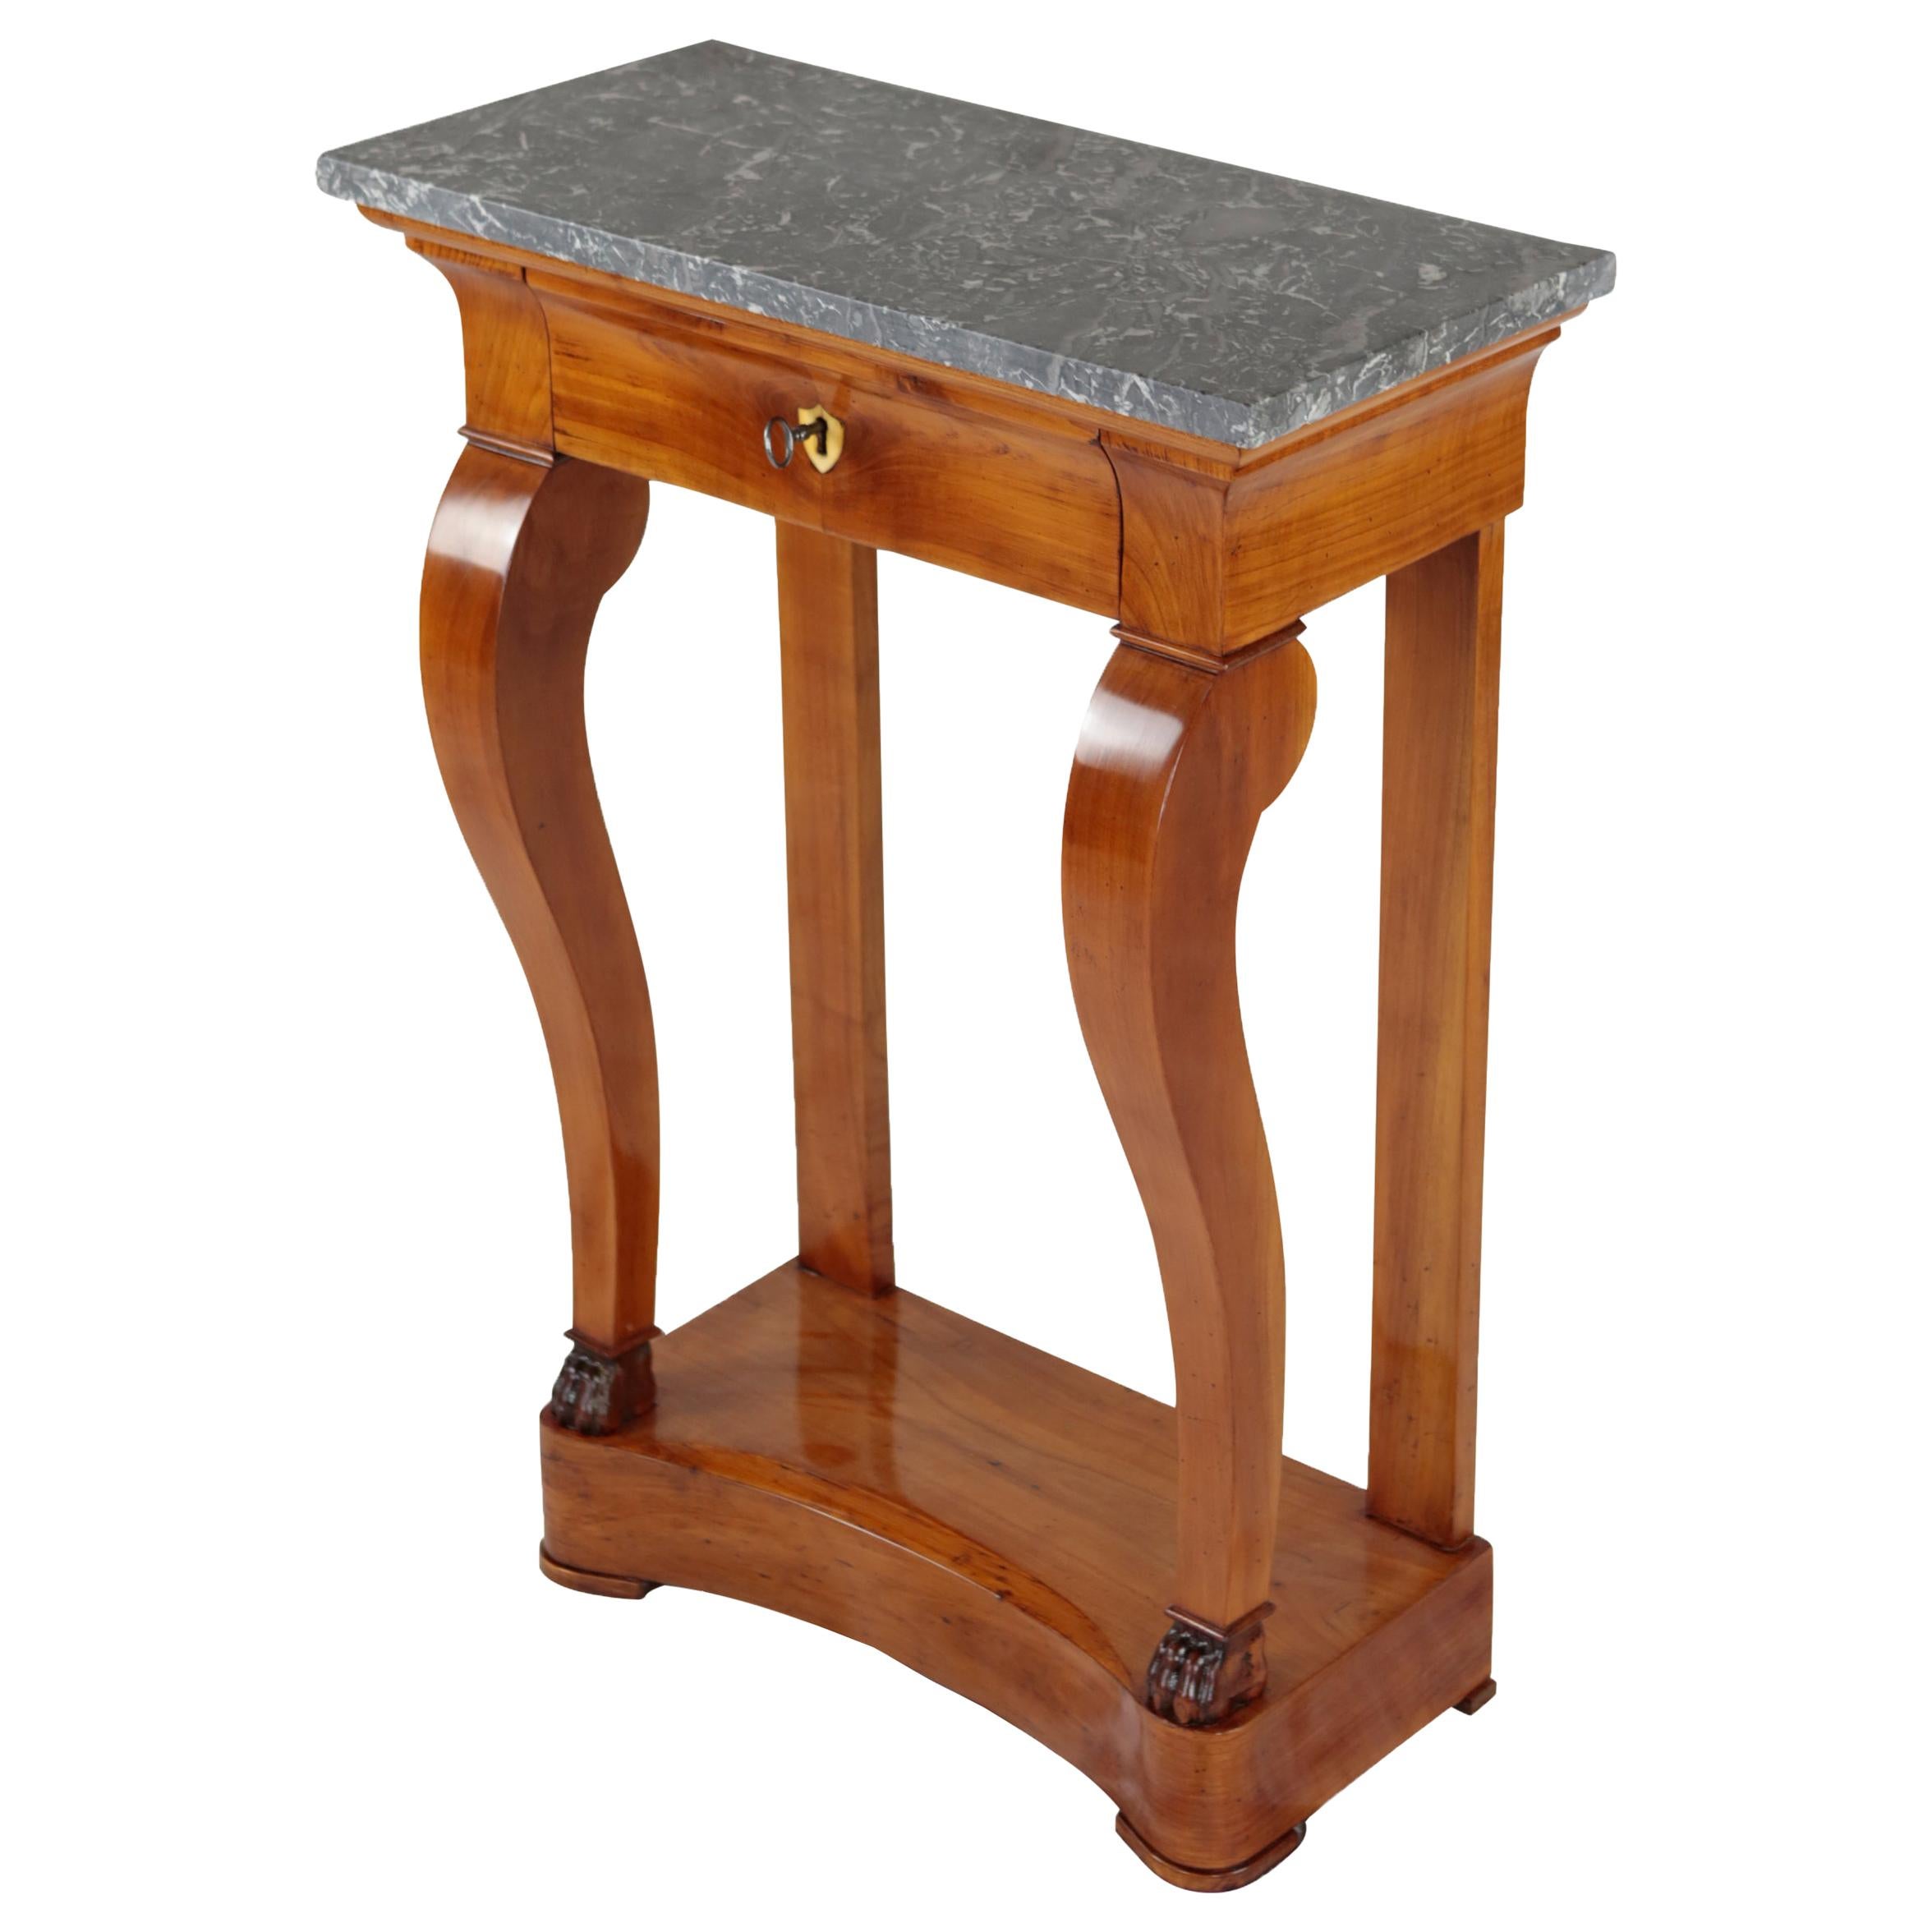 19th Century Biedermeier Period Console Table with Marble Top, Cherrywood Veneer For Sale